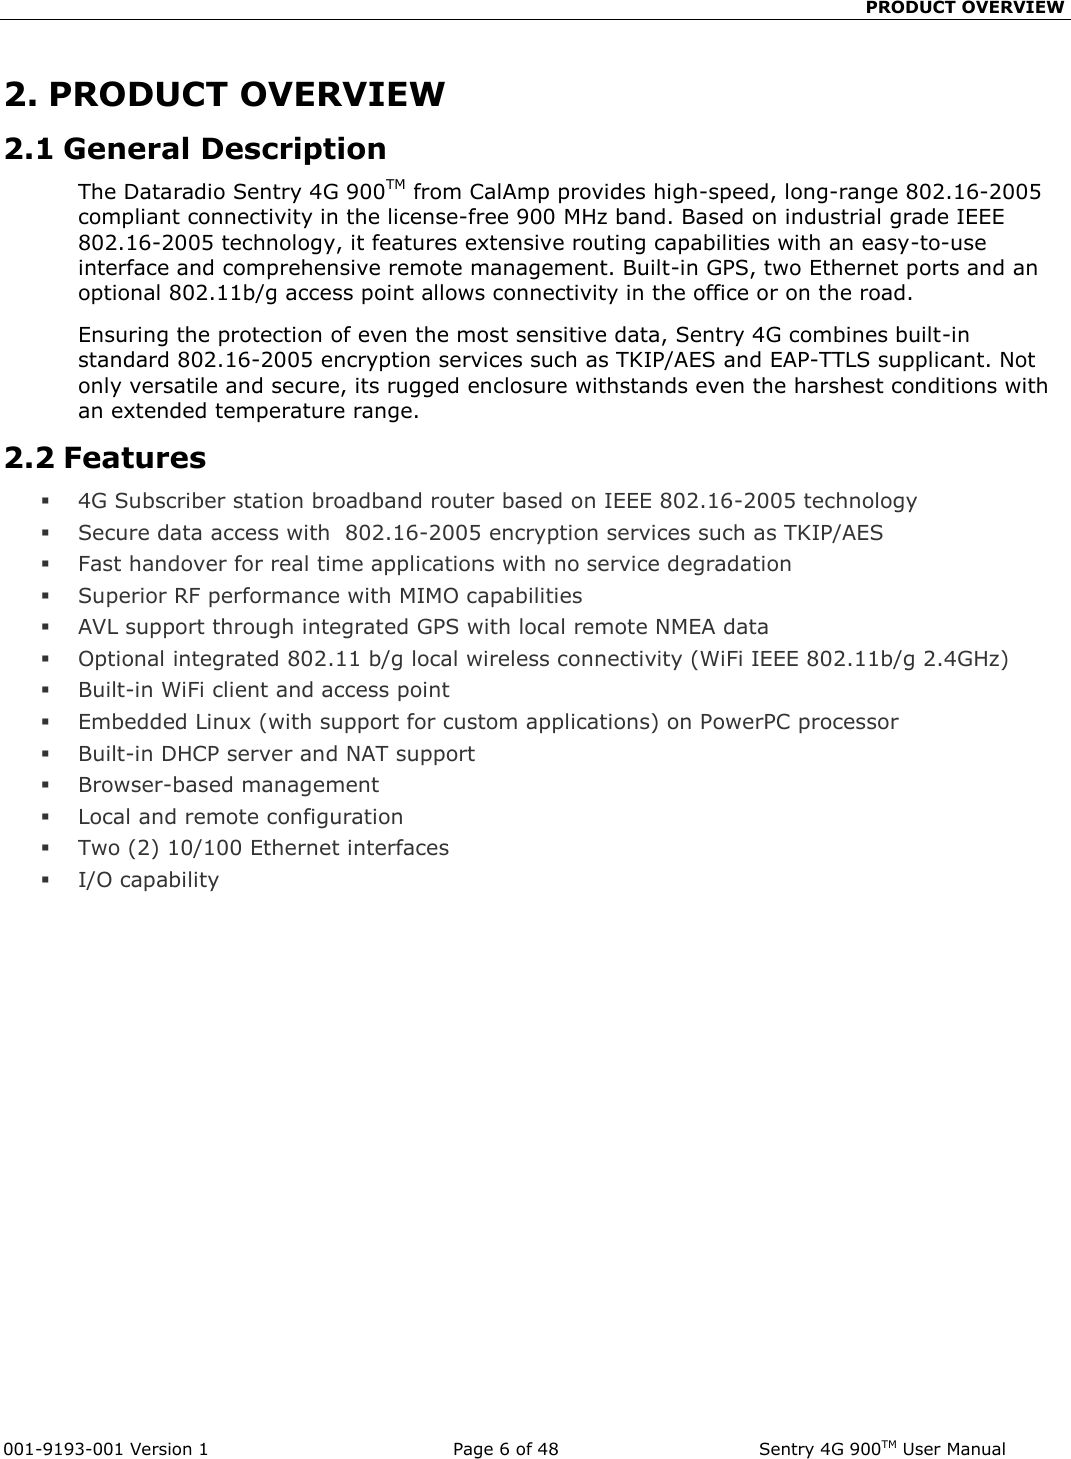                                                 PRODUCT OVERVIEW  001-9193-001 Version 1              Page 6 of 48              Sentry 4G 900TM User Manual 2. PRODUCT OVERVIEW 2.1 General Description The Dataradio Sentry 4G 900TM from CalAmp provides high-speed, long-range 802.16-2005 compliant connectivity in the license-free 900 MHz band. Based on industrial grade IEEE 802.16-2005 technology, it features extensive routing capabilities with an easy-to-use interface and comprehensive remote management. Built-in GPS, two Ethernet ports and an optional 802.11b/g access point allows connectivity in the office or on the road. Ensuring the protection of even the most sensitive data, Sentry 4G combines built-in standard 802.16-2005 encryption services such as TKIP/AES and EAP-TTLS supplicant. Not only versatile and secure, its rugged enclosure withstands even the harshest conditions with an extended temperature range.  2.2 Features  4G Subscriber station broadband router based on IEEE 802.16-2005 technology  Secure data access with  802.16-2005 encryption services such as TKIP/AES  Fast handover for real time applications with no service degradation  Superior RF performance with MIMO capabilities  AVL support through integrated GPS with local remote NMEA data  Optional integrated 802.11 b/g local wireless connectivity (WiFi IEEE 802.11b/g 2.4GHz)   Built-in WiFi client and access point  Embedded Linux (with support for custom applications) on PowerPC processor  Built-in DHCP server and NAT support   Browser-based management   Local and remote configuration  Two (2) 10/100 Ethernet interfaces  I/O capability  